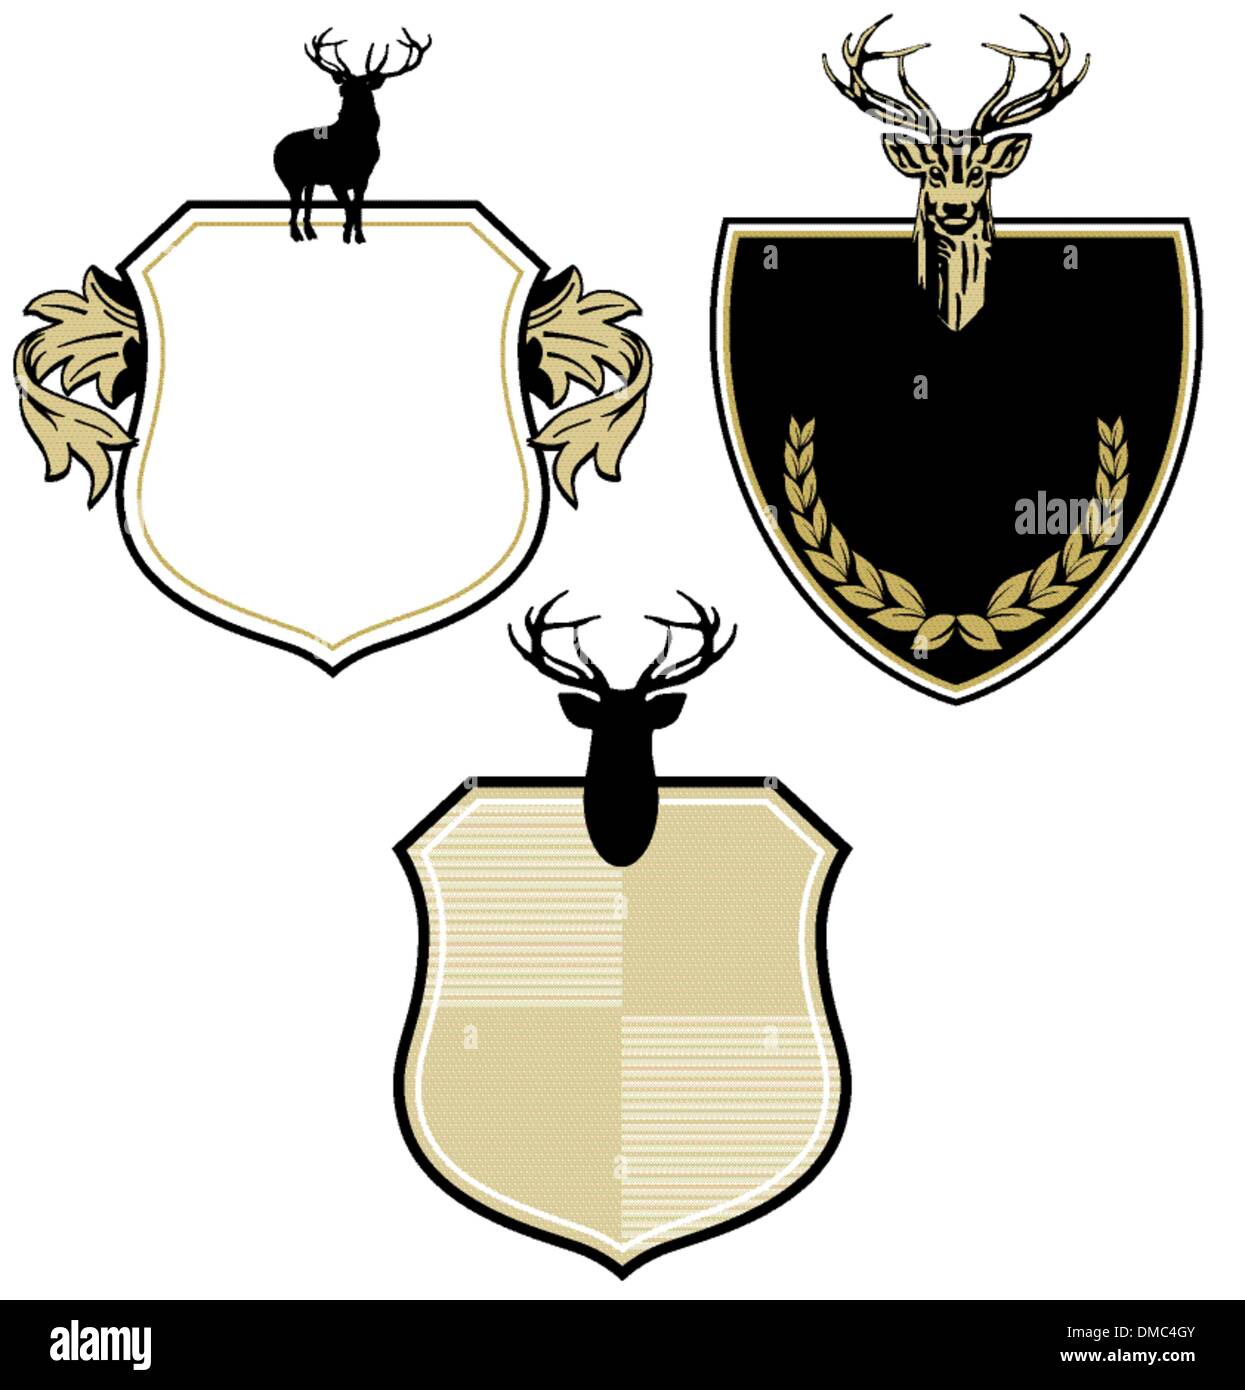 Coat of arms with three deer Stock Vector